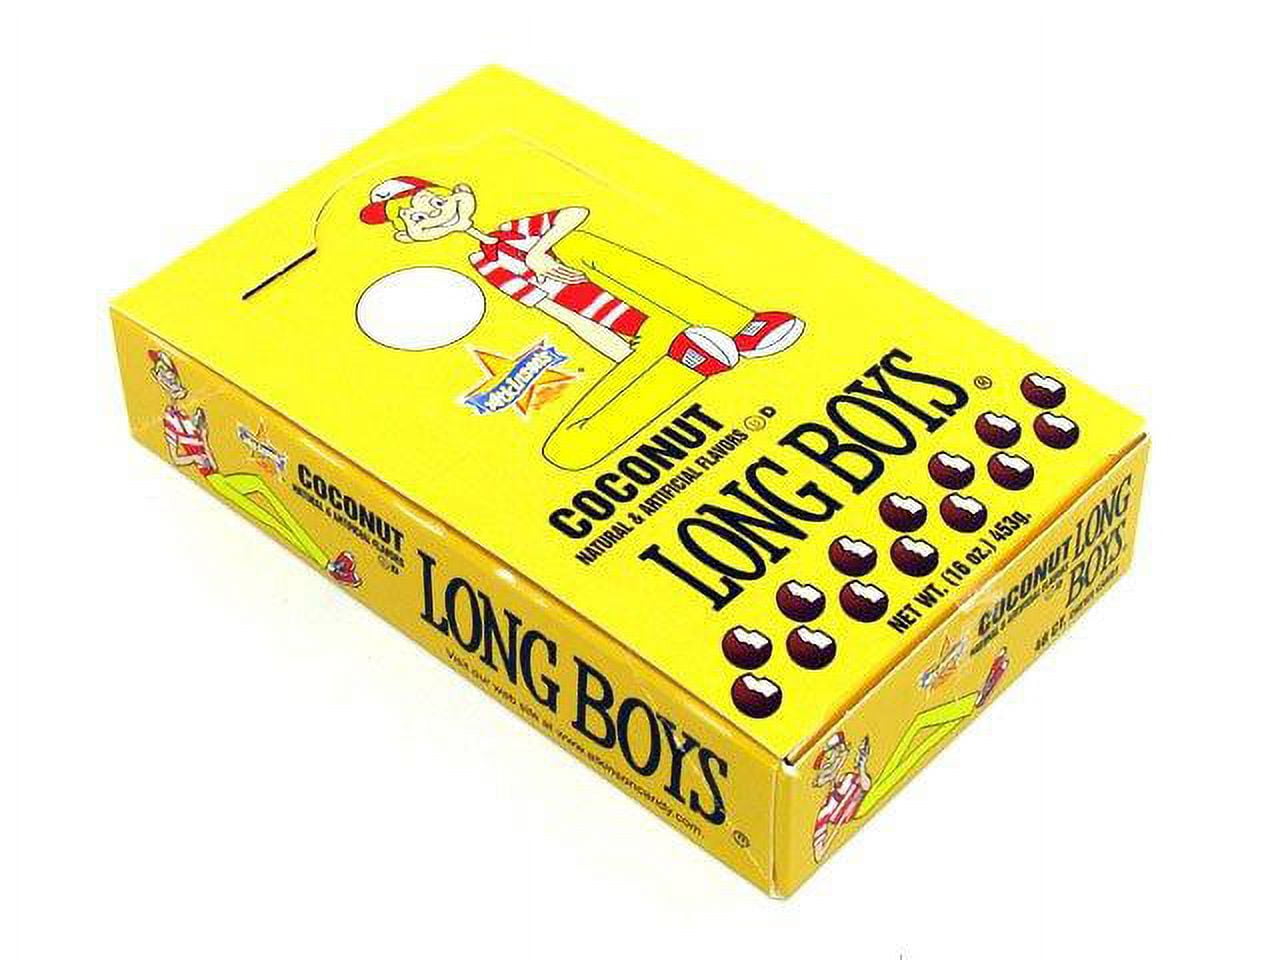 Long Boys® Coconut Fun Size Caramels (48 count box) – Atkinson Candy Co.